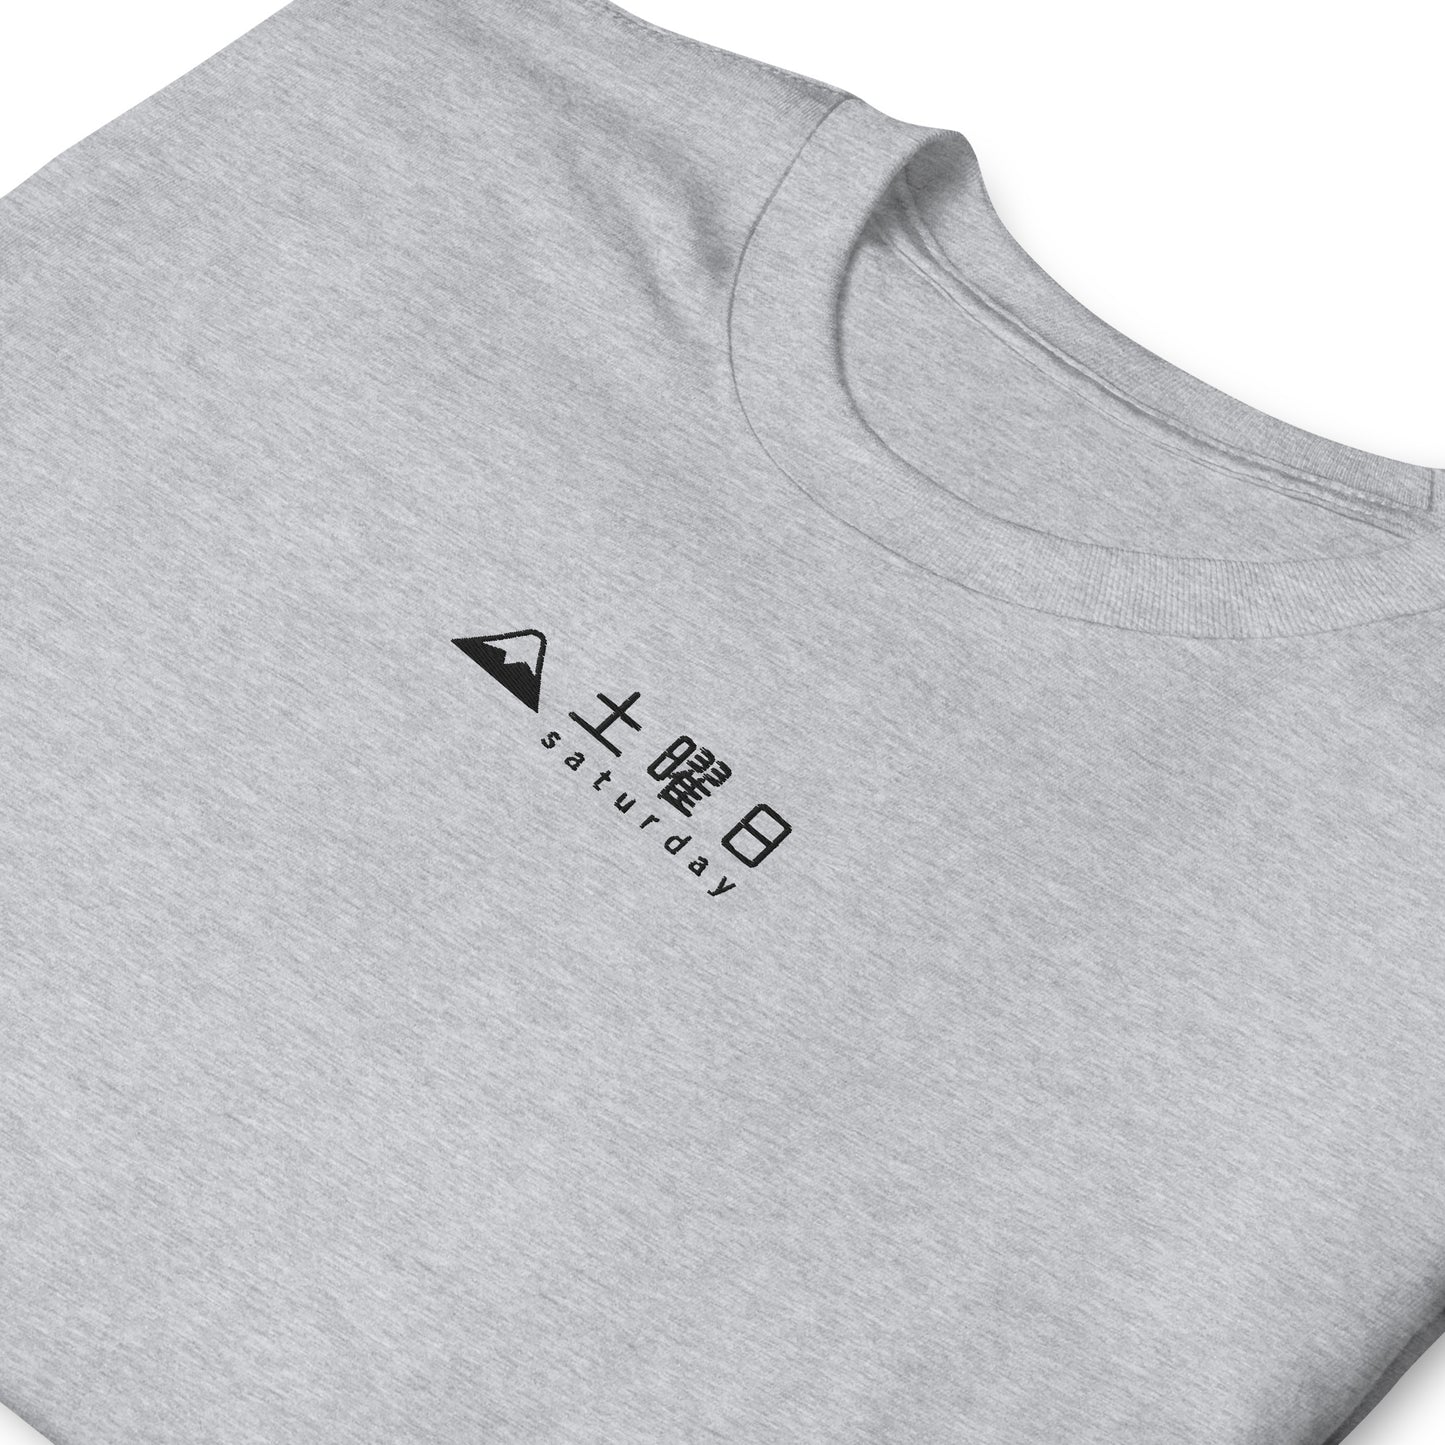 Light Gray High Quality Tee - Front Design with an Black Embroidery "Saturday" in Japanese and English